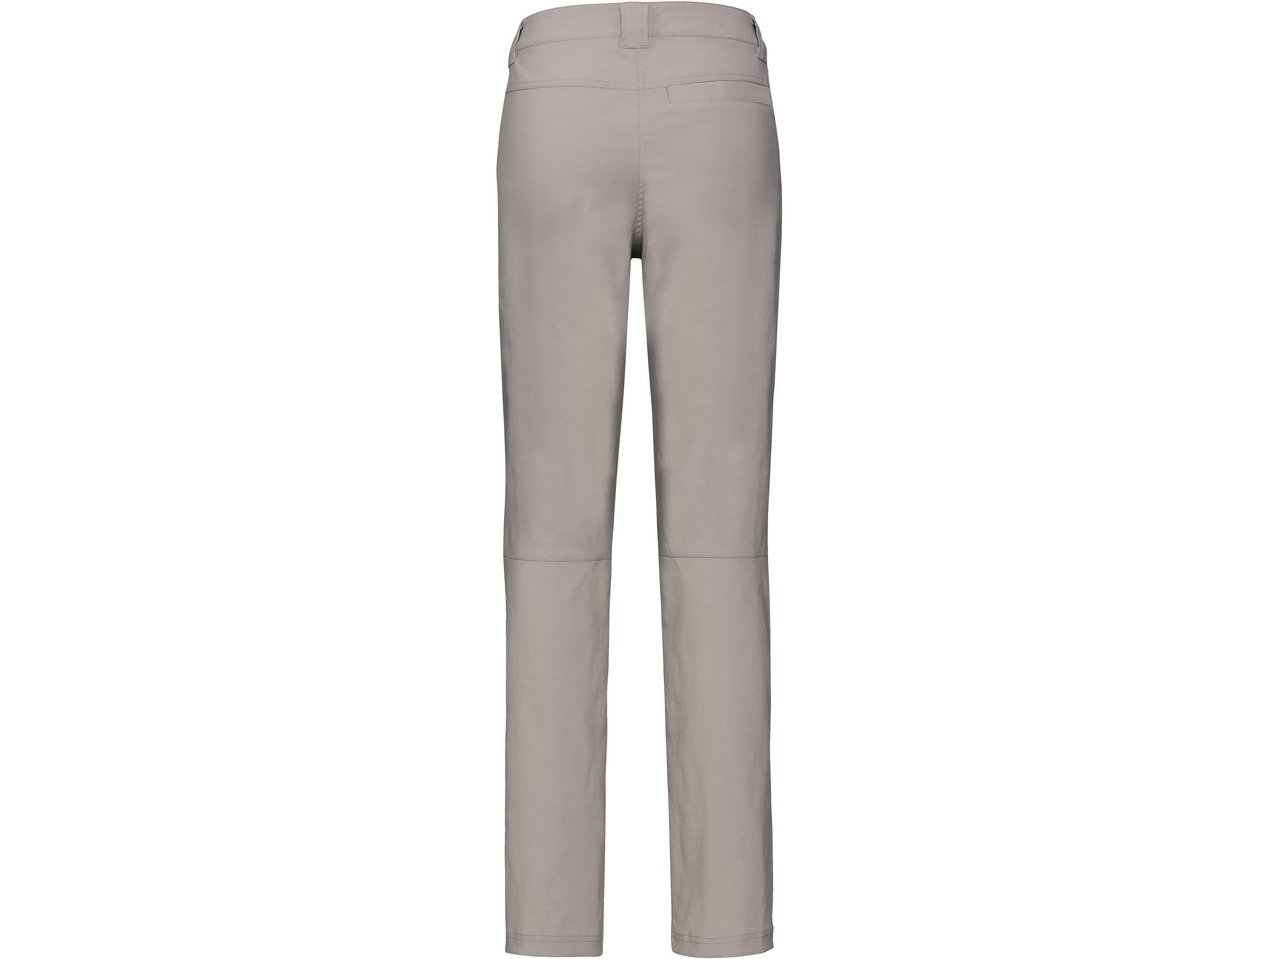 Ladies' Hiking Trousers - Lidl — Ireland - Specials archive